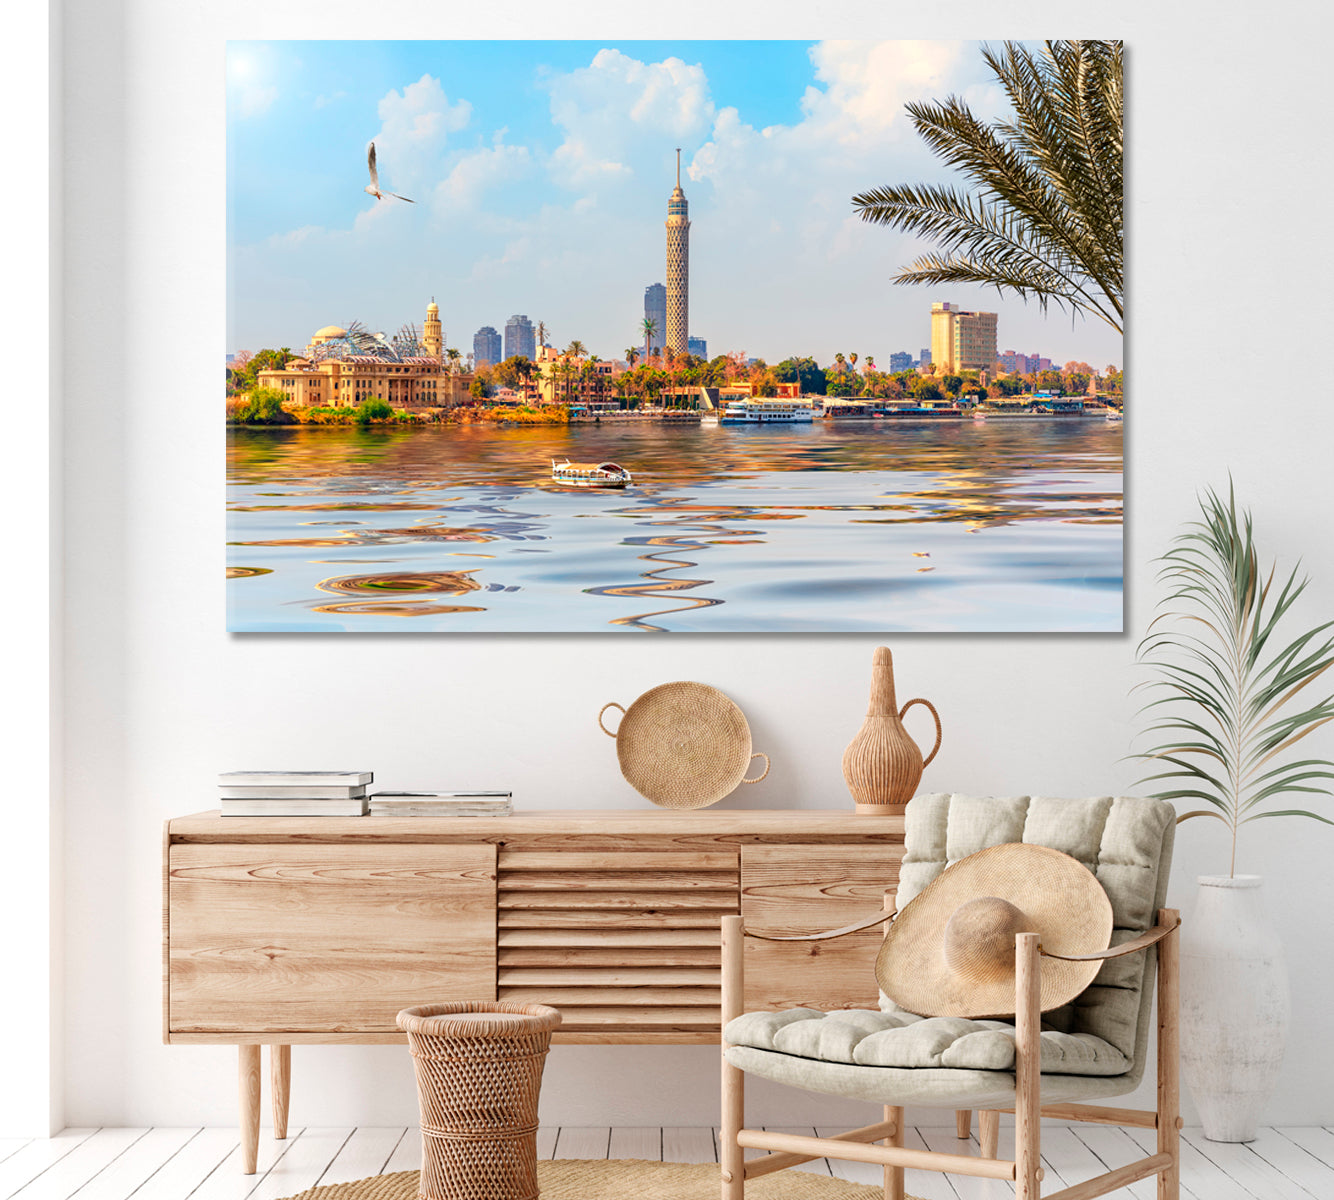 Cairo Tower in Gezira Egypt Canvas Print ArtLexy 1 Panel 24"x16" inches 